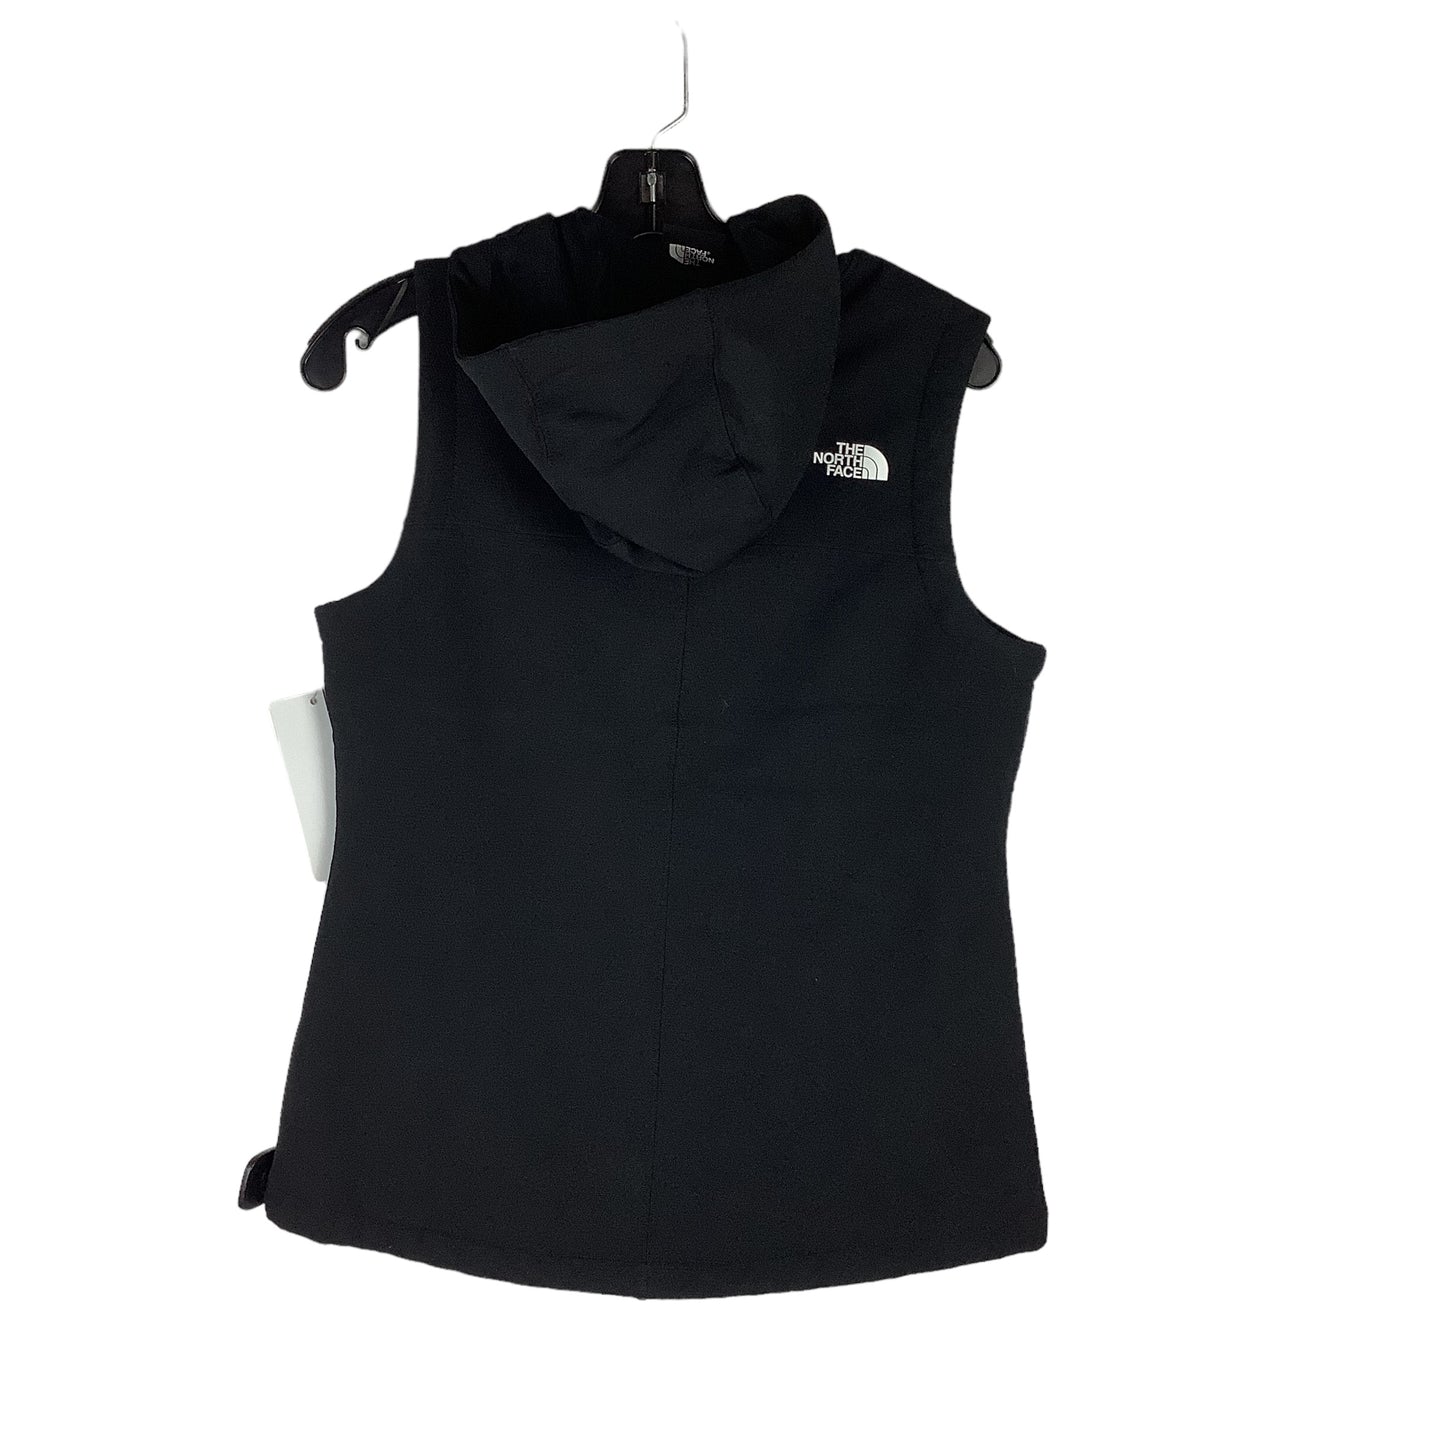 Vest Designer By The North Face  Size: S